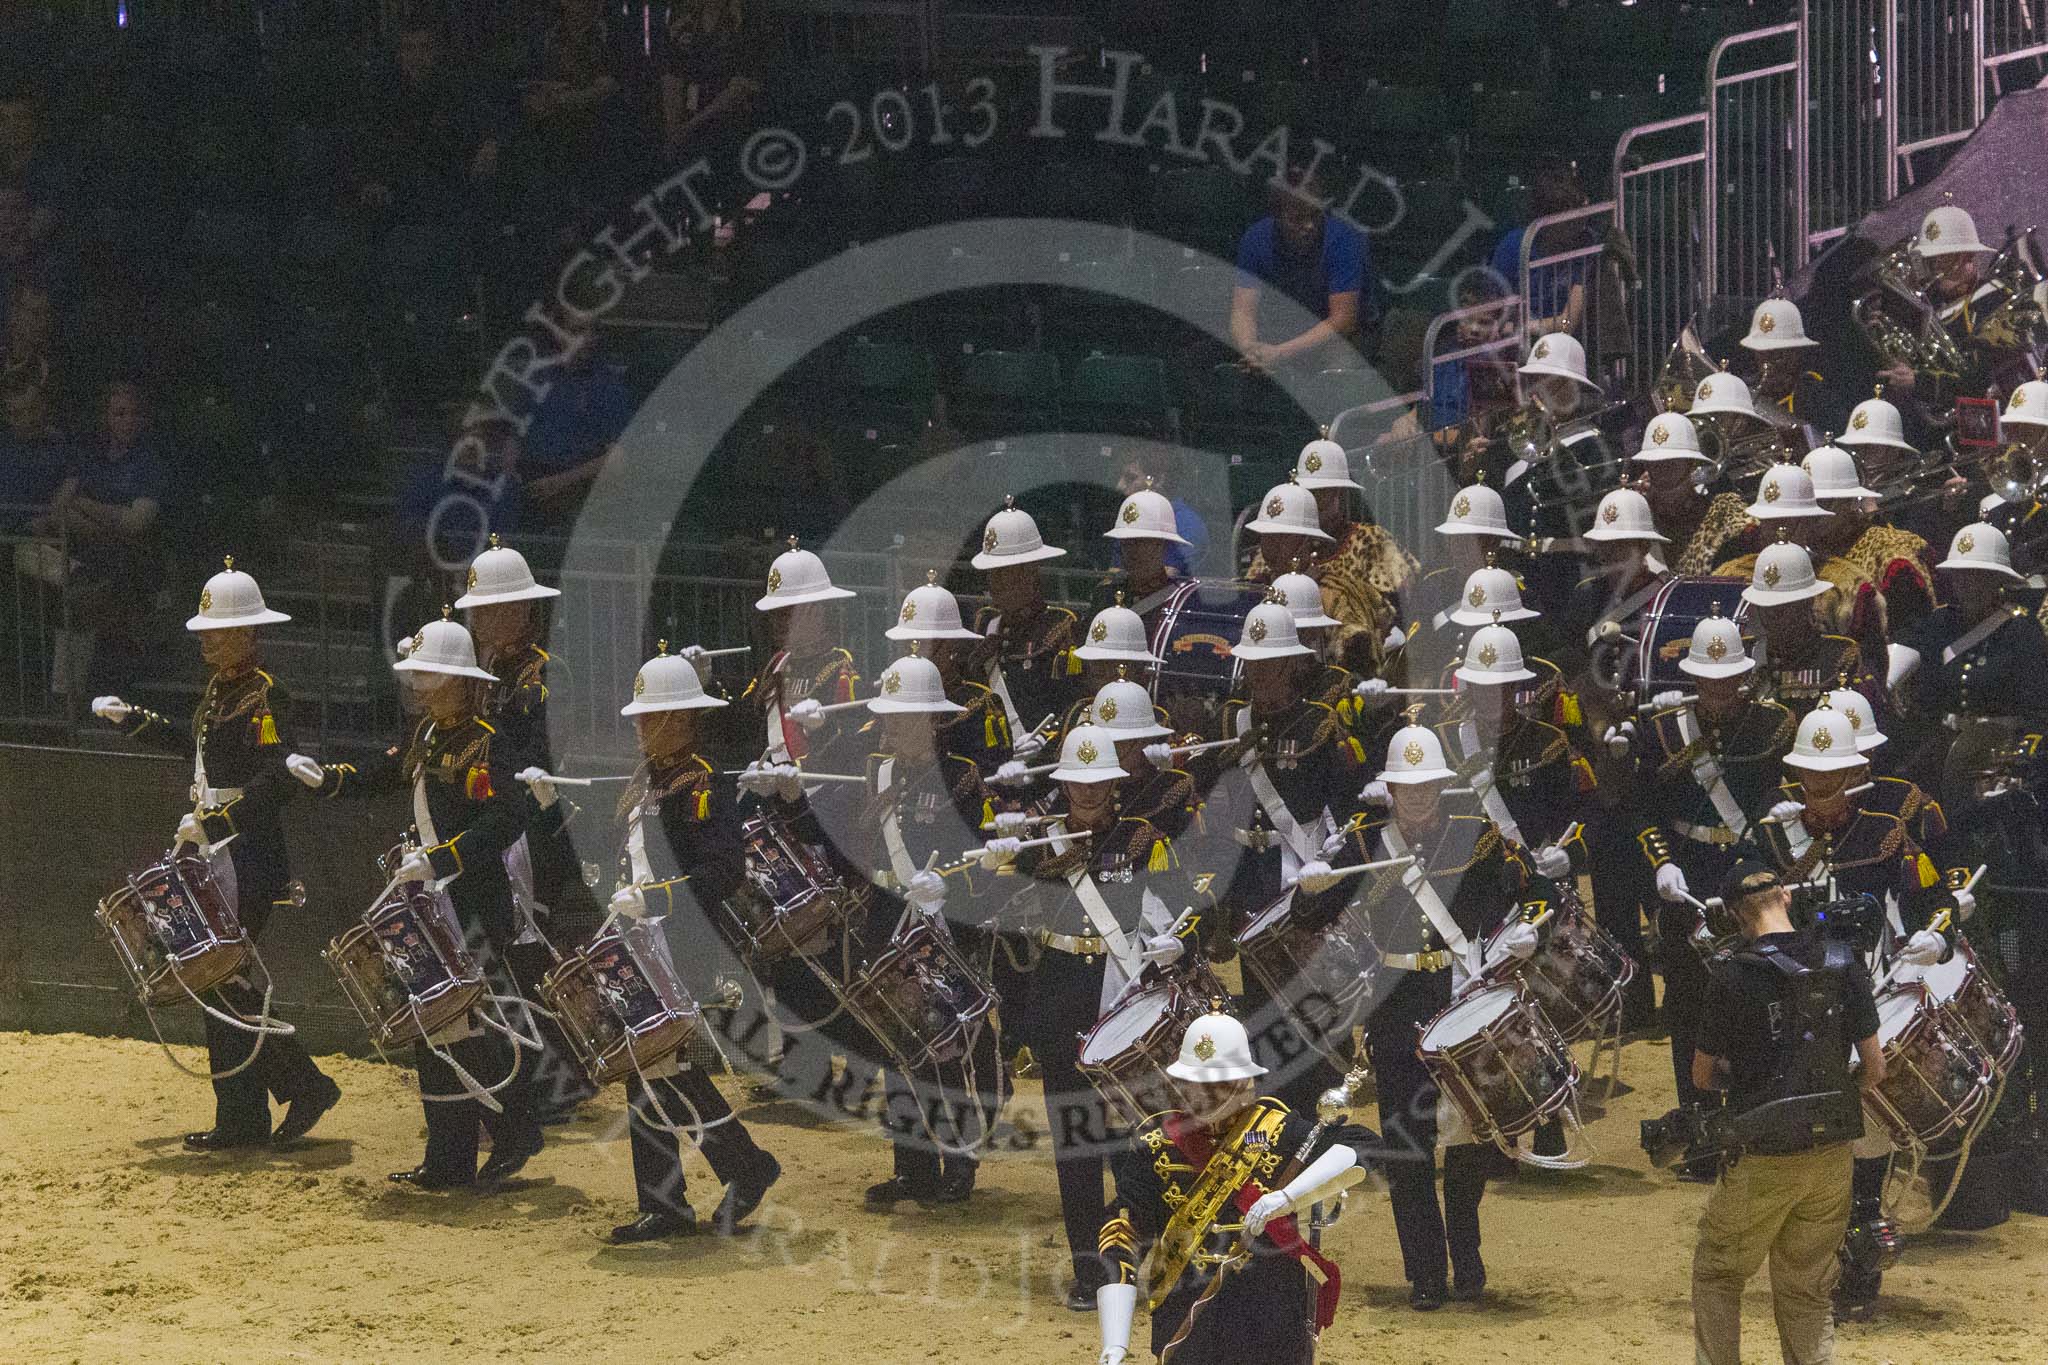 British Military Tournament 2013.
Earls Court,
London SW5,

United Kingdom,
on 06 December 2013 at 16:48, image #477